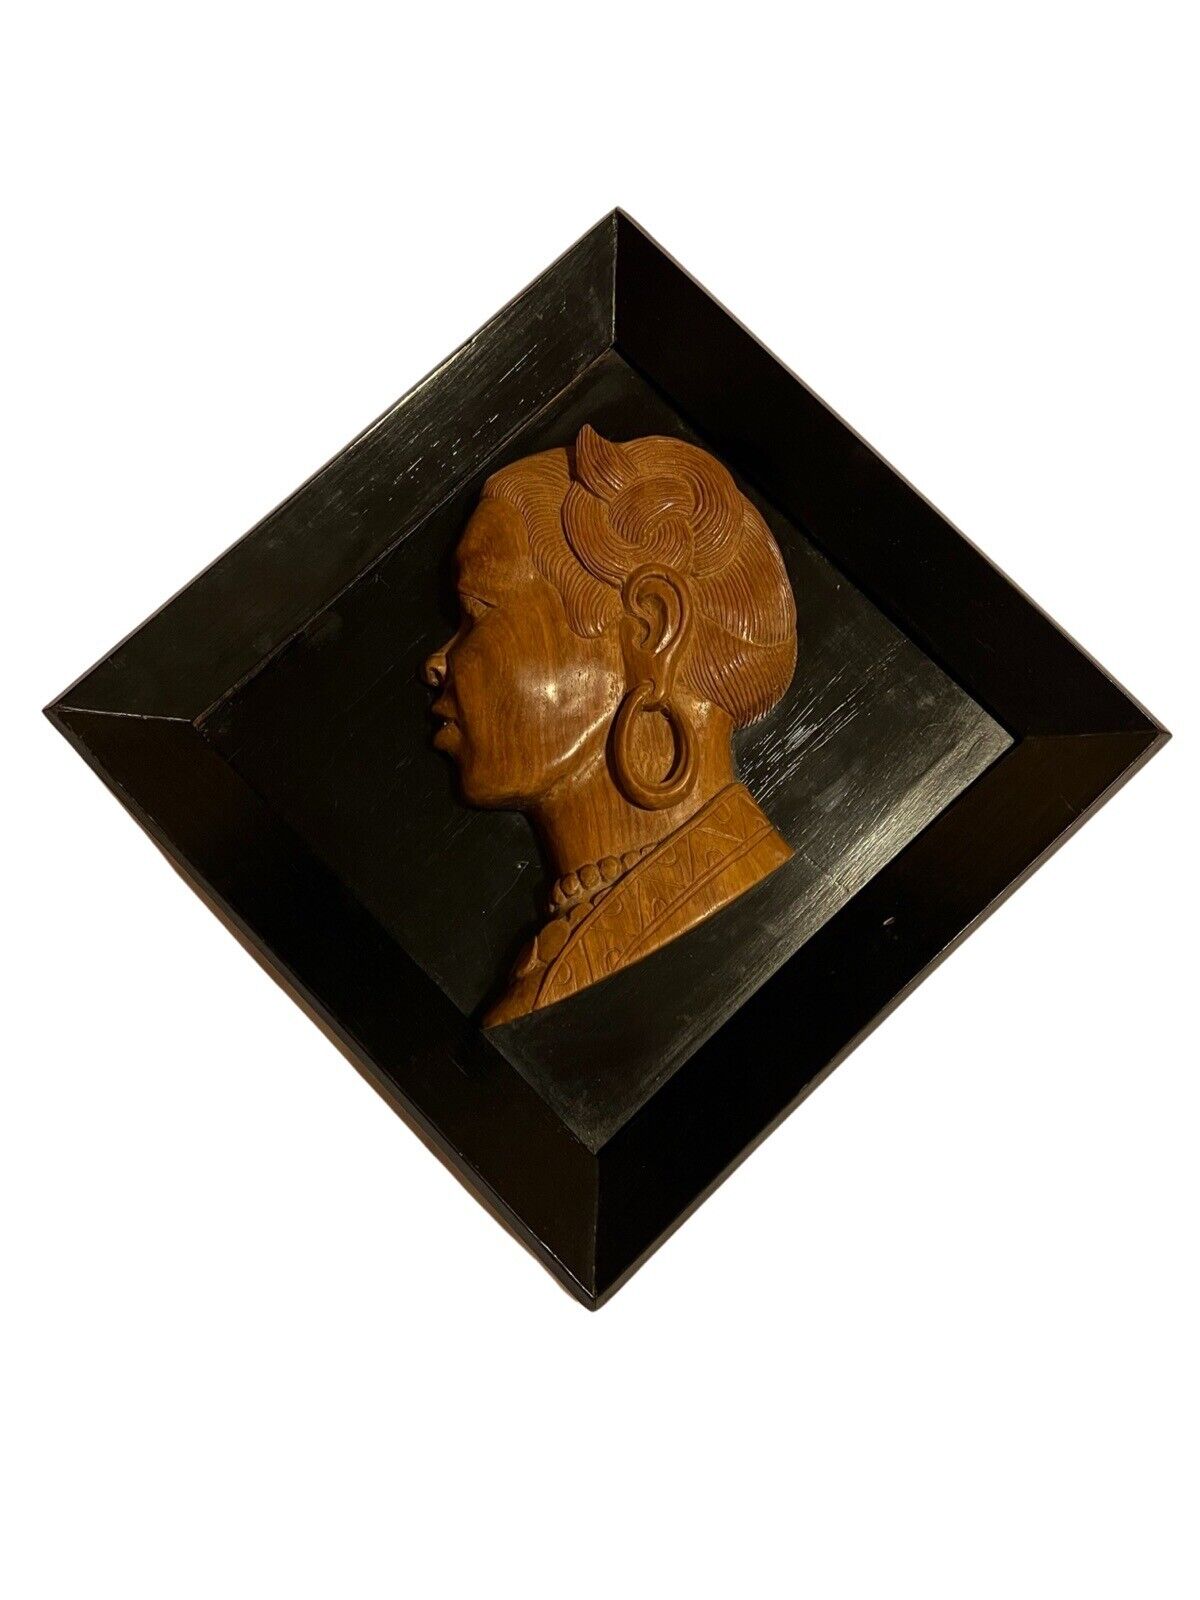 Vintage 1957 Hand Carved Profile Of A Woman With Hand Written Inscription 